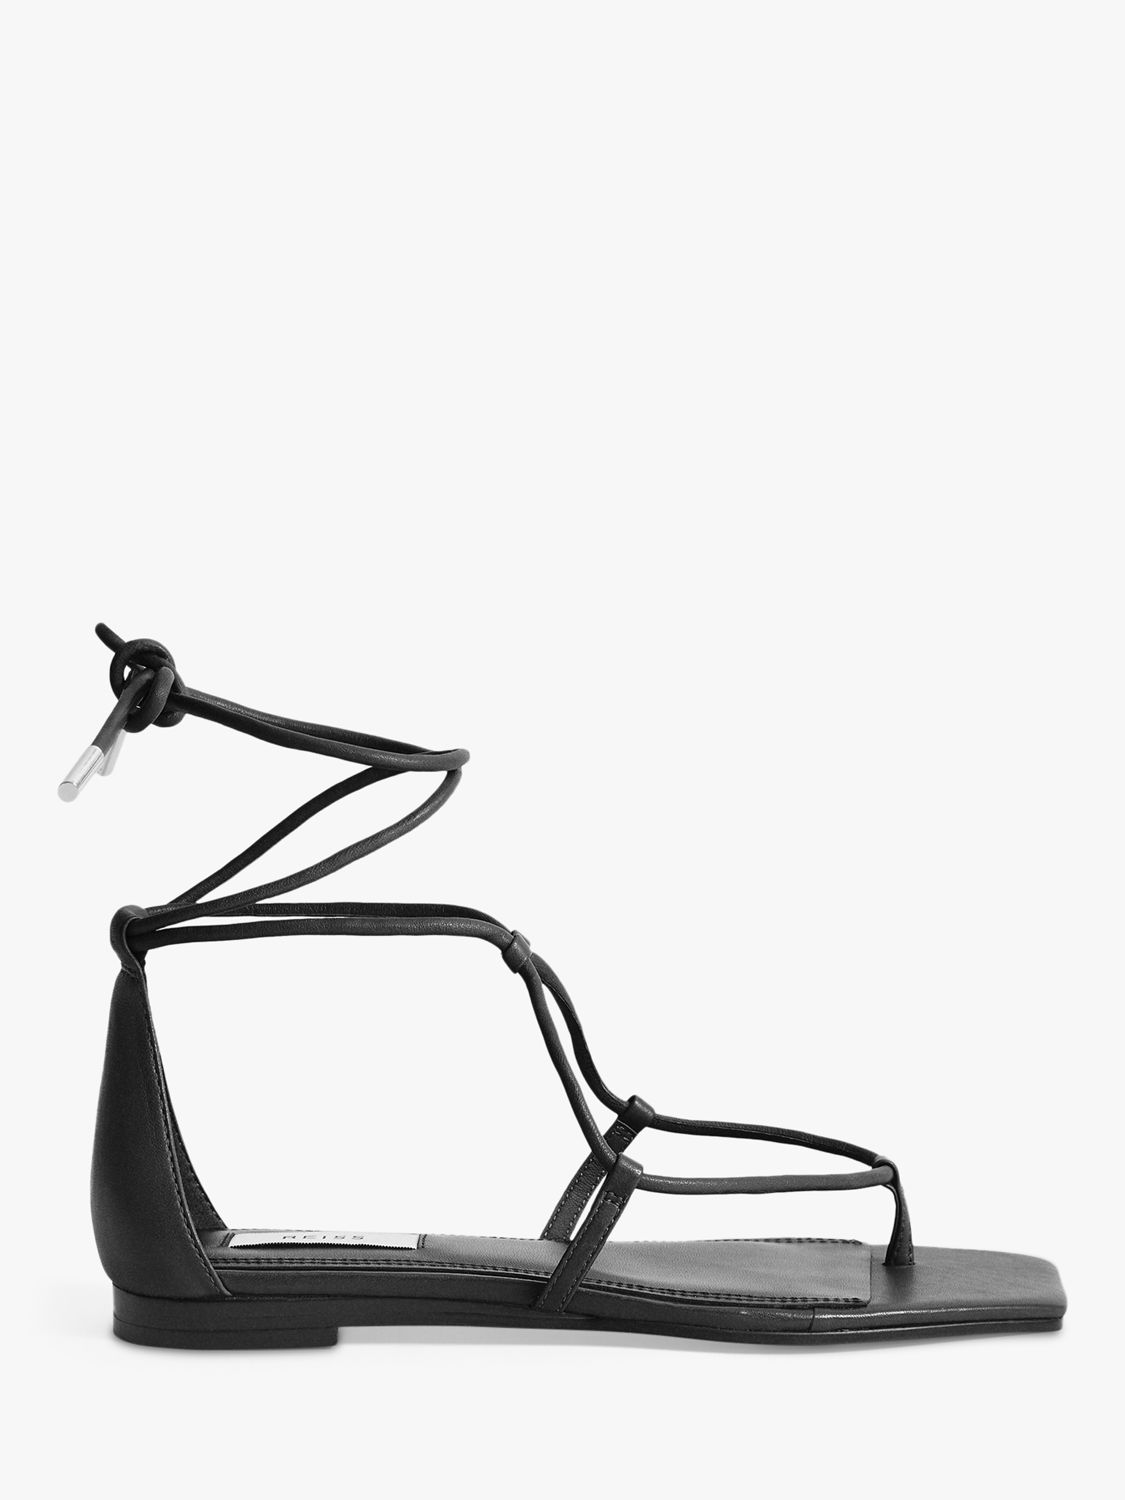 Reiss Kali Flat Leather Strappy Sandals, Black at John Lewis & Partners